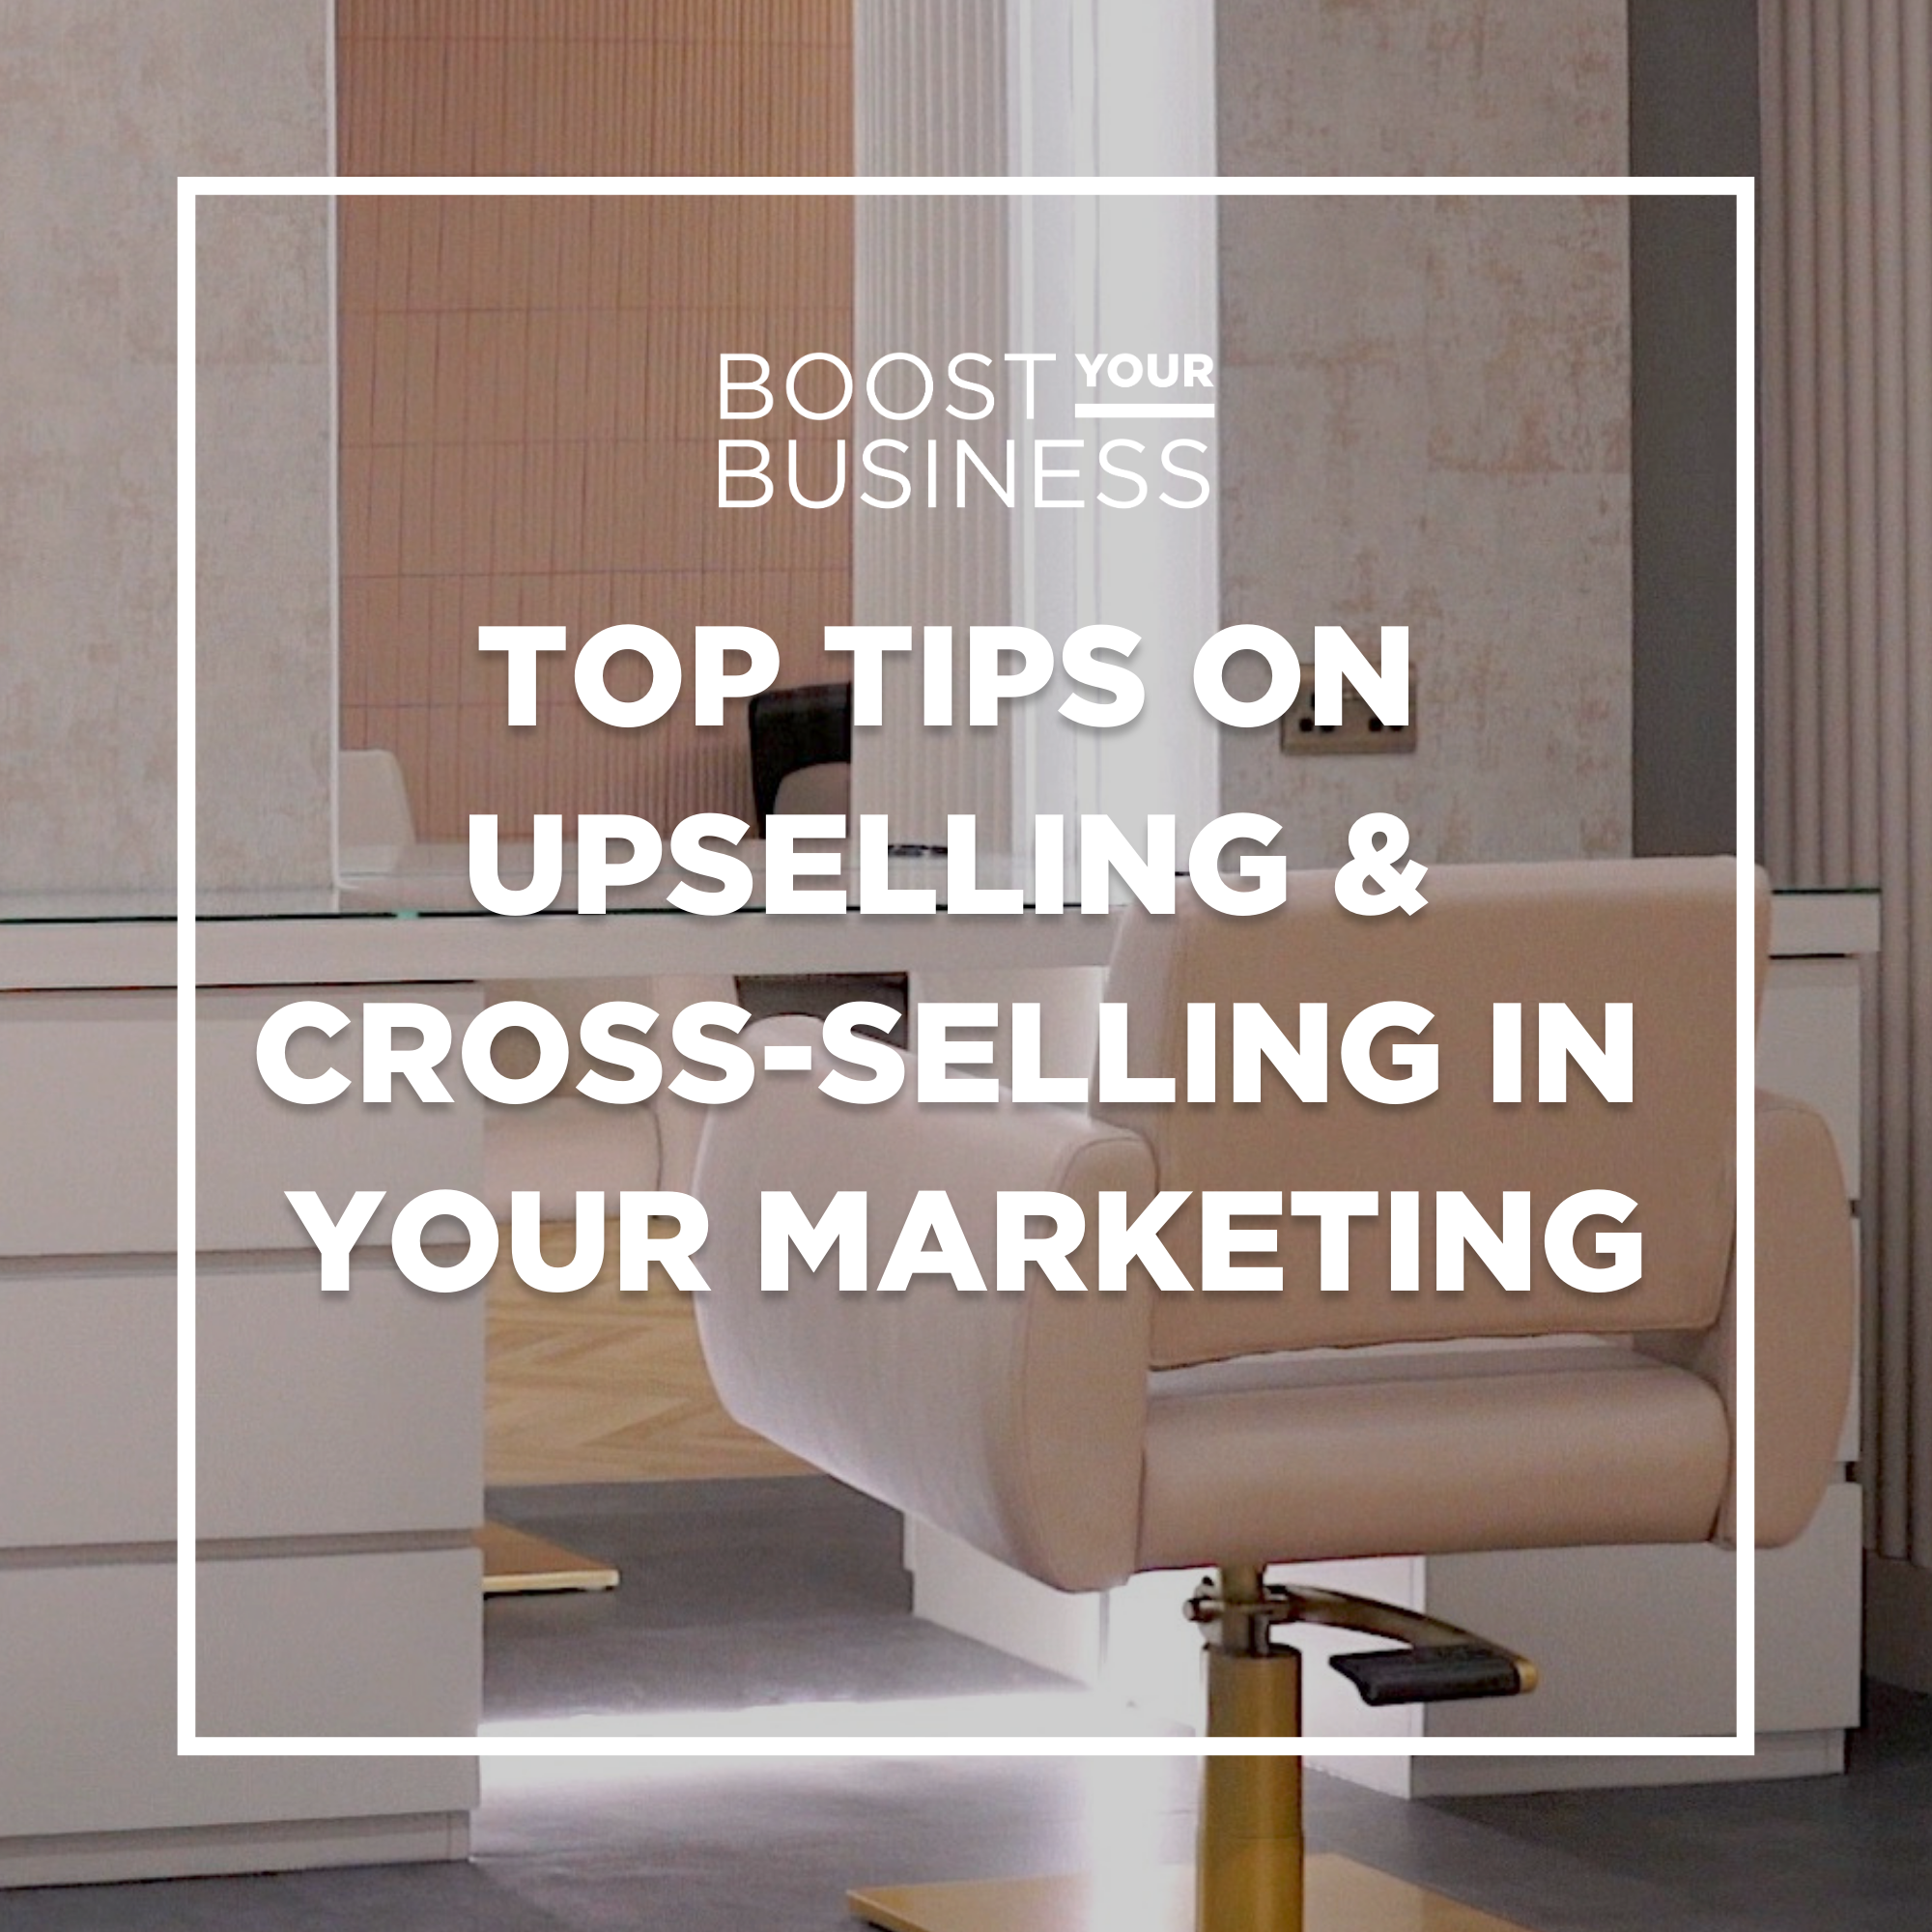 Top Tips On Upselling And Cross-Selling In Your Marketing